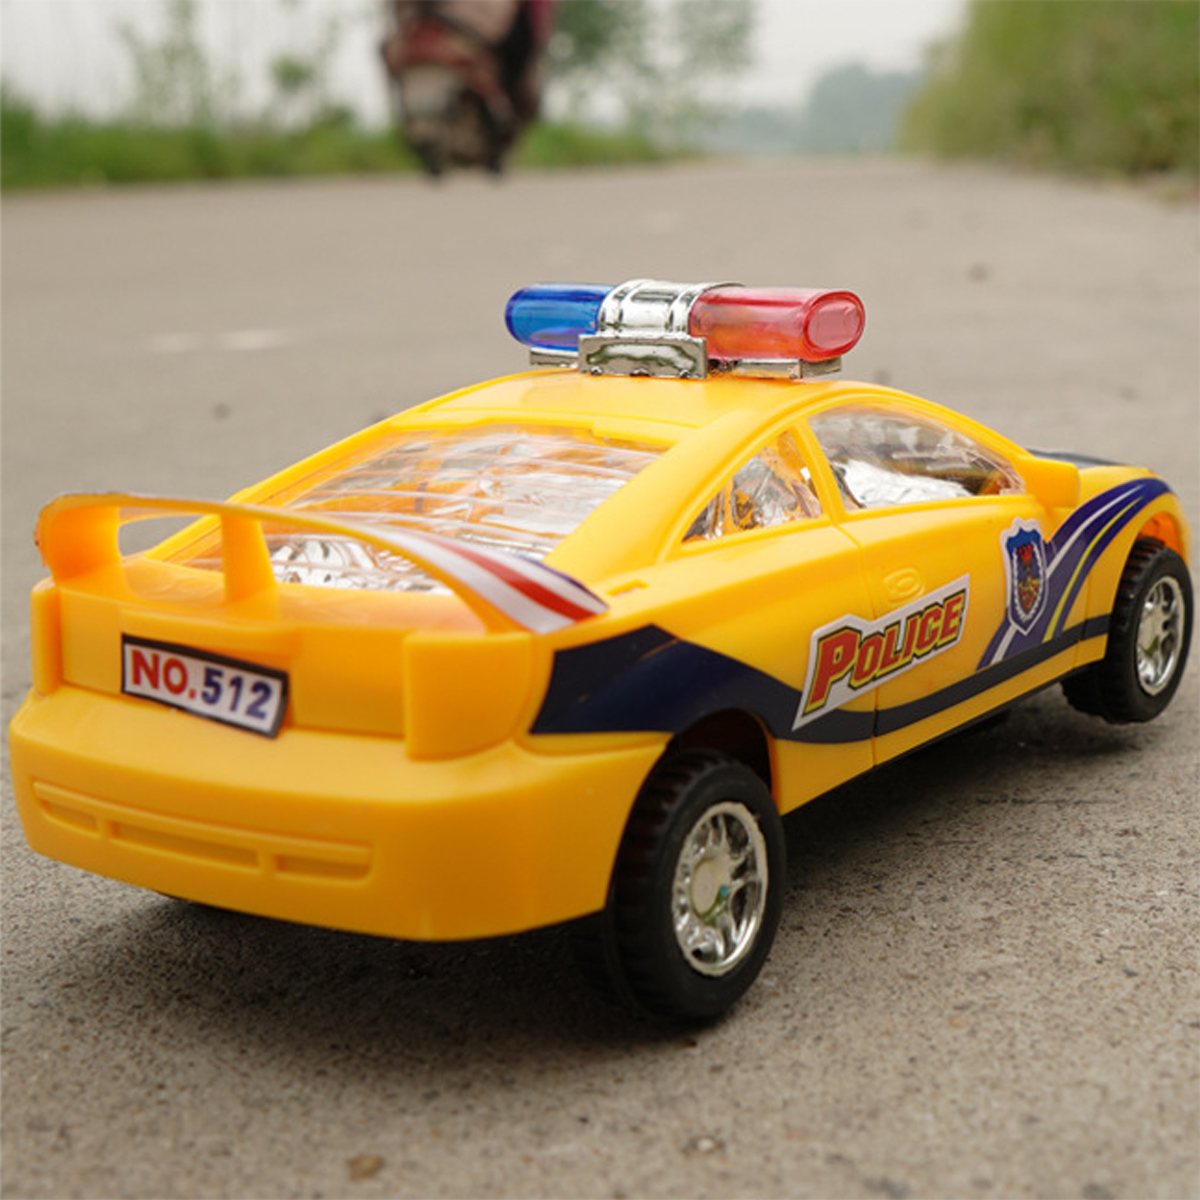 Childrens-Electric-Alloy-Simulation-Po-lice-Car-Diecast-Model-Toy-with-LED-Light-and-Music-1604579-8